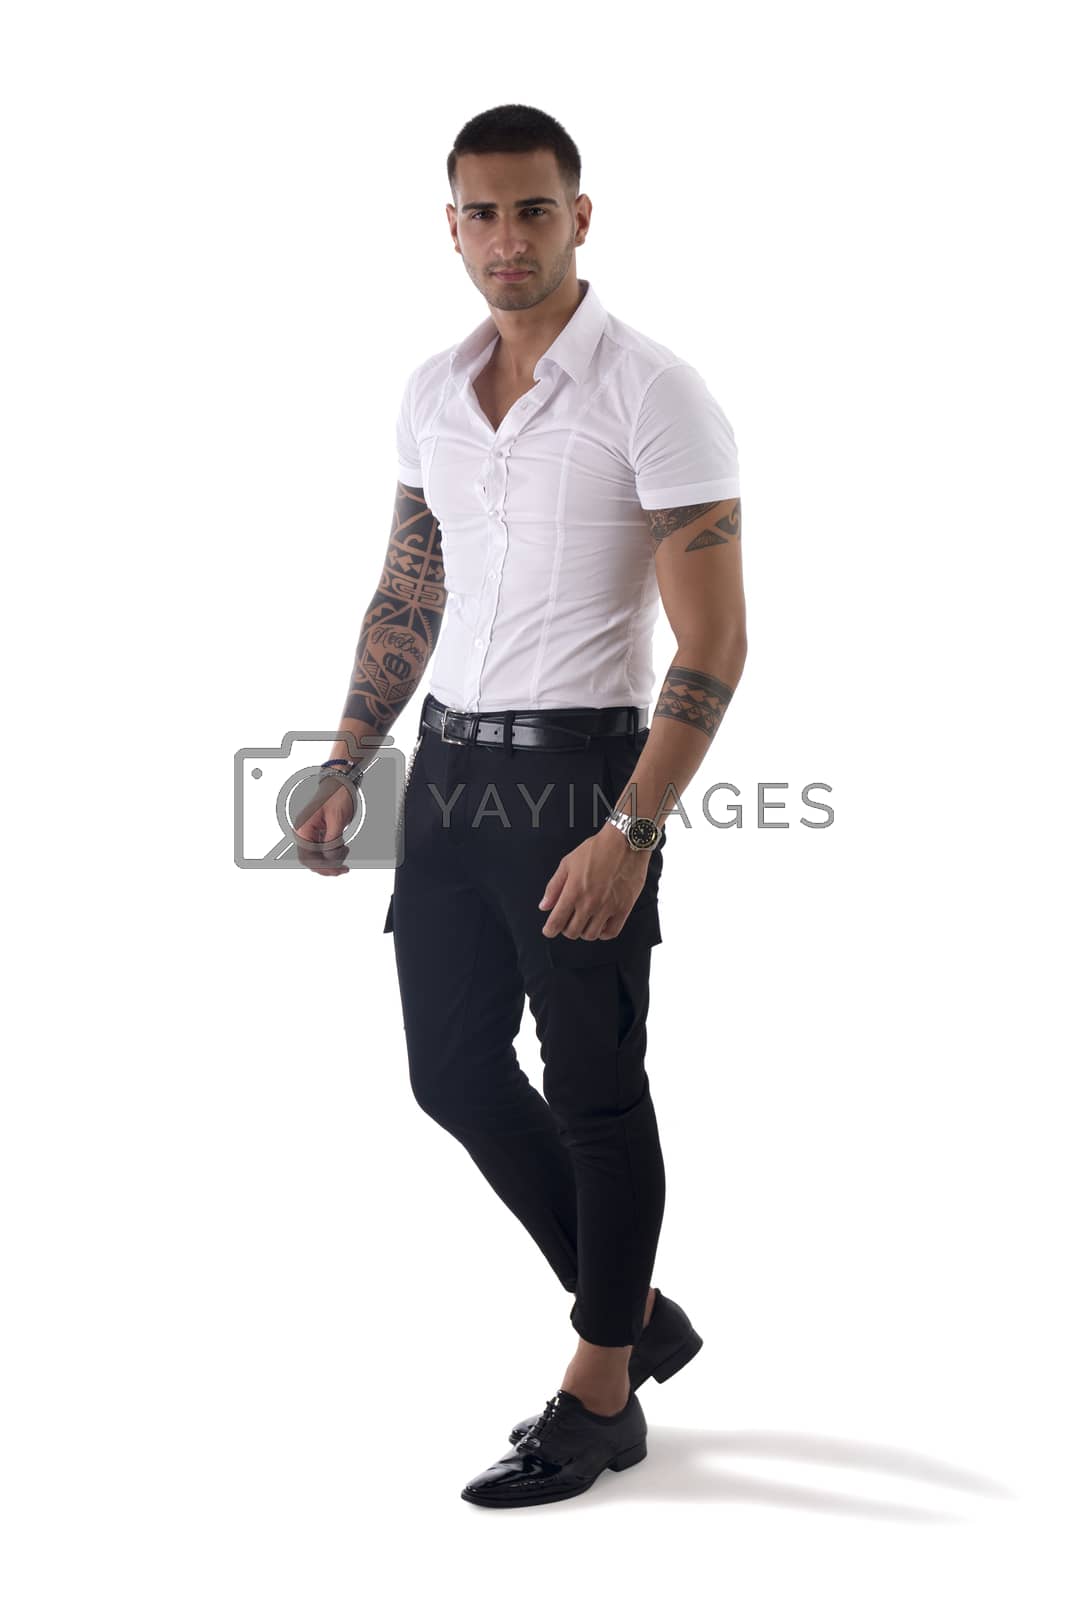 Royalty free image of Young smiling man in white shirt and jeans isolated by artofphoto